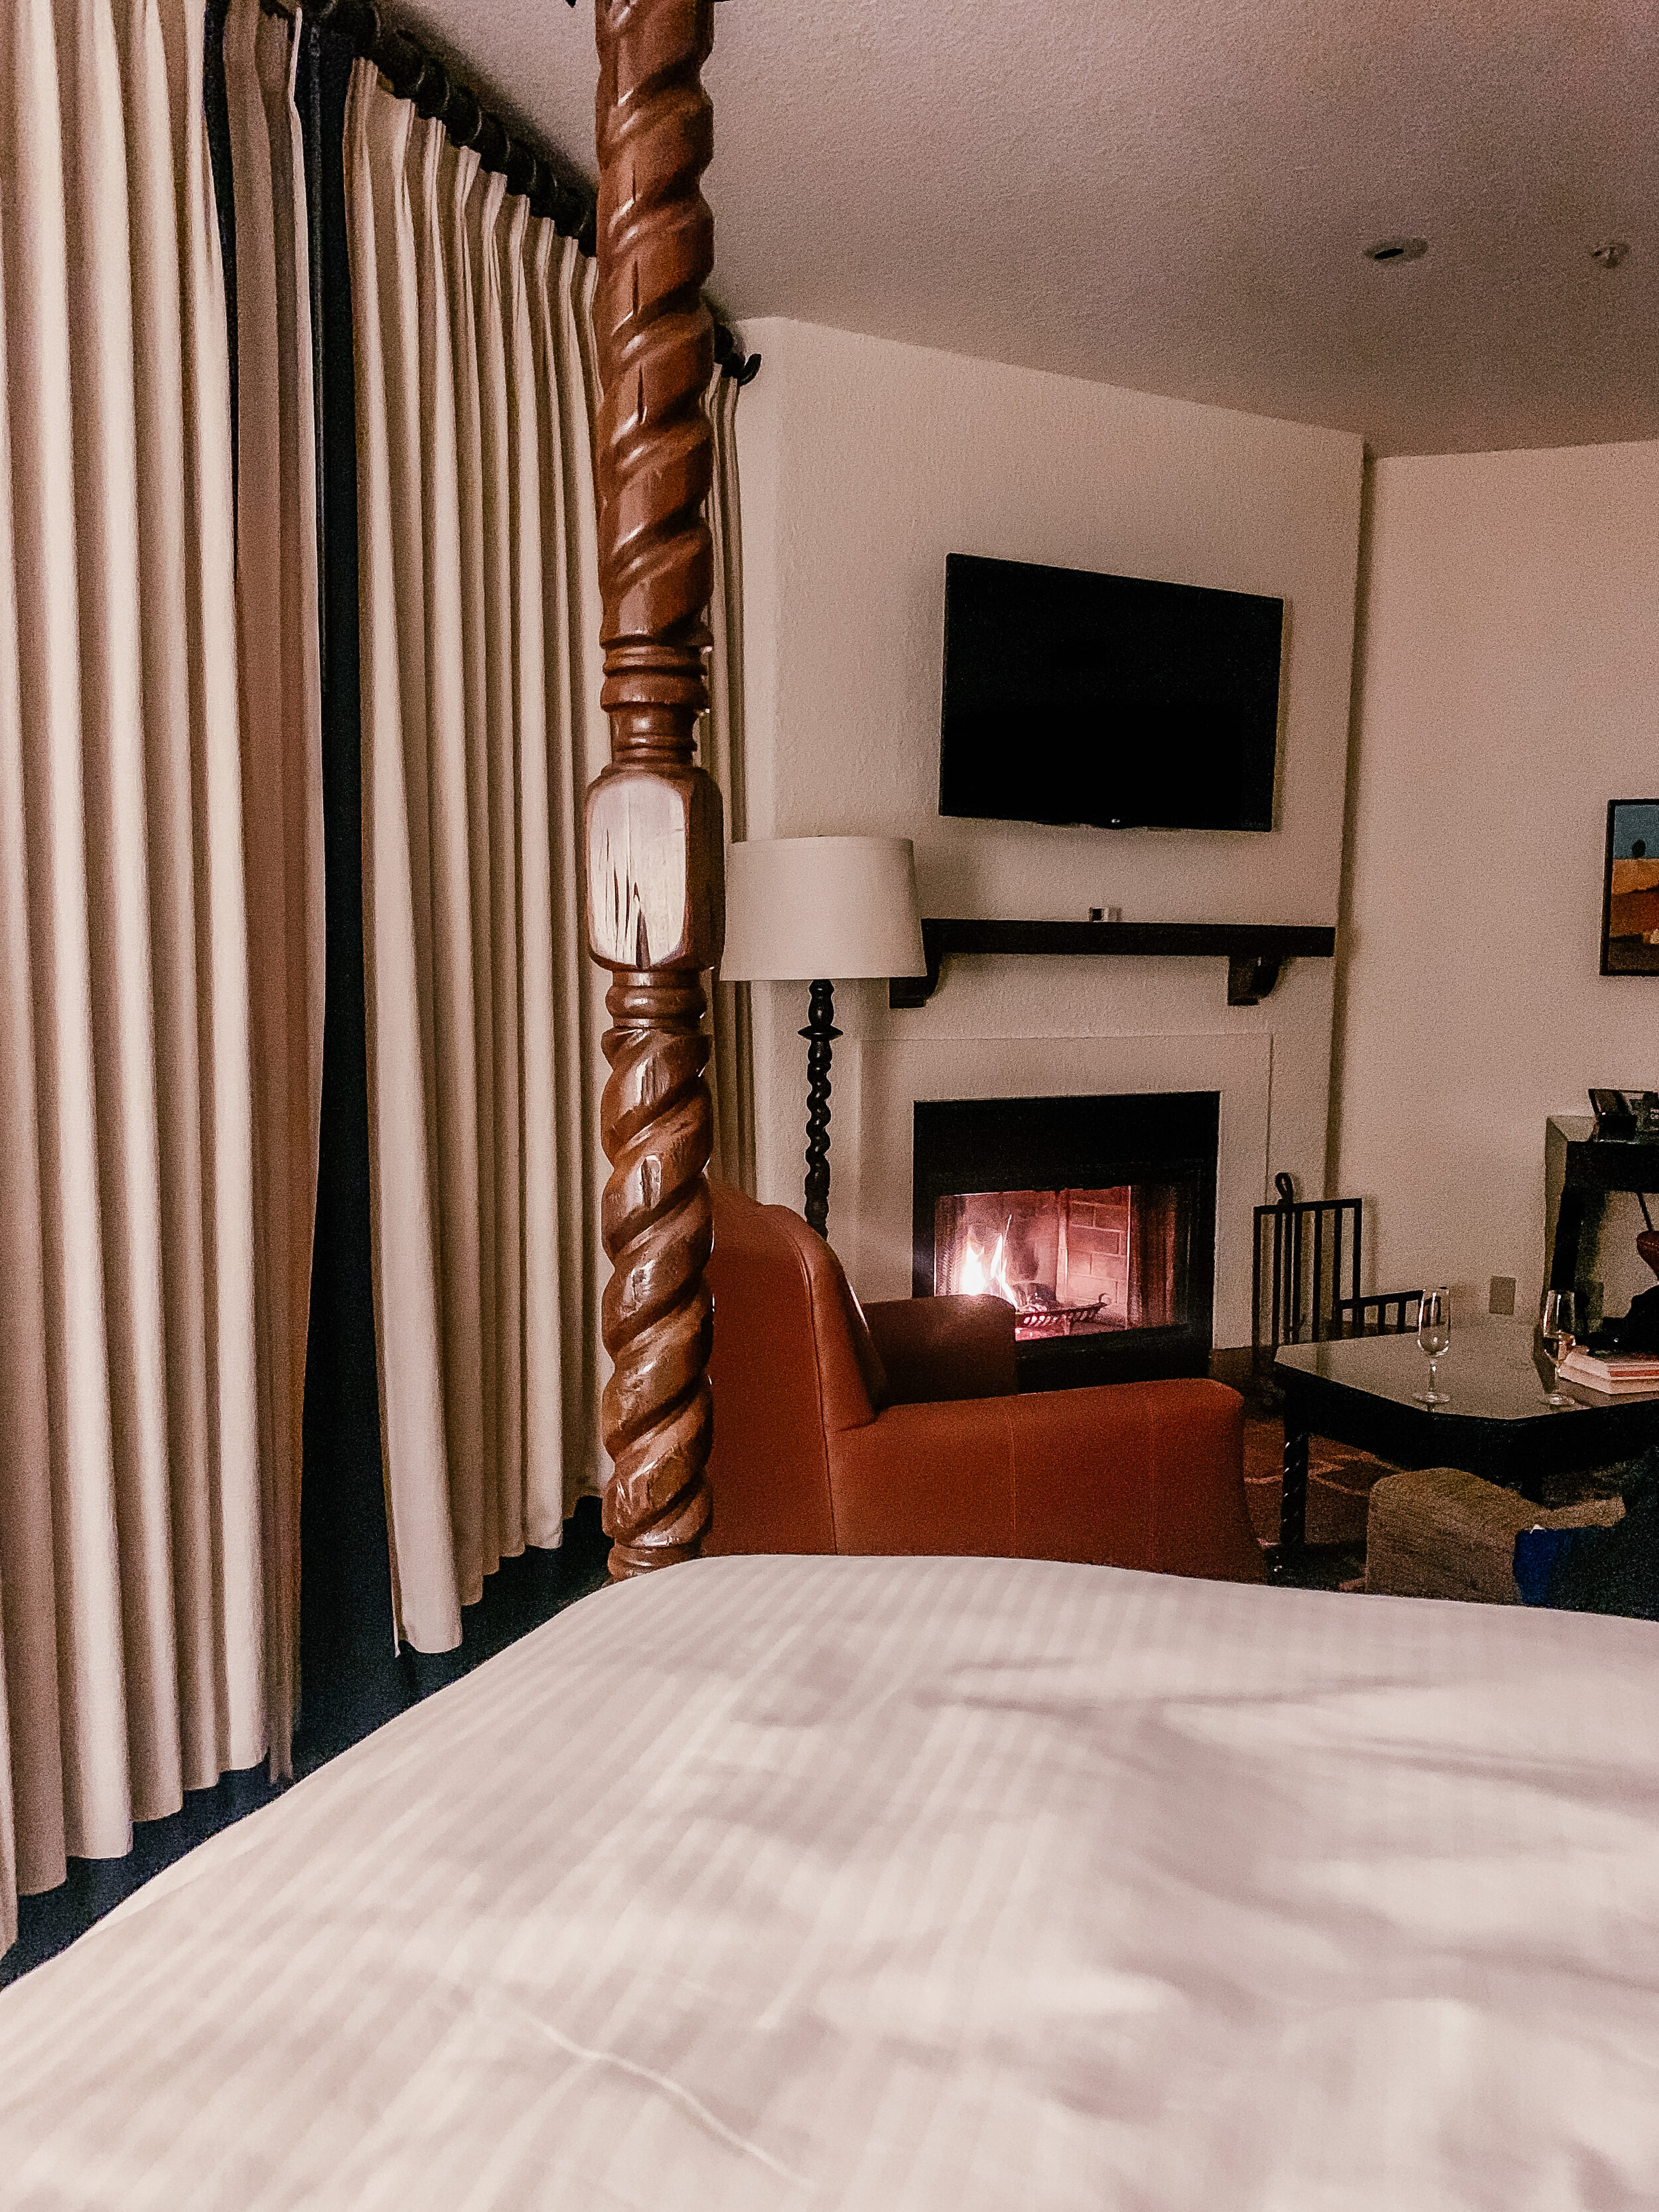 Fairmont Sonoma Mission Inn & Spa Review  - Mission Suite - Fireplace in hotel room.JPG